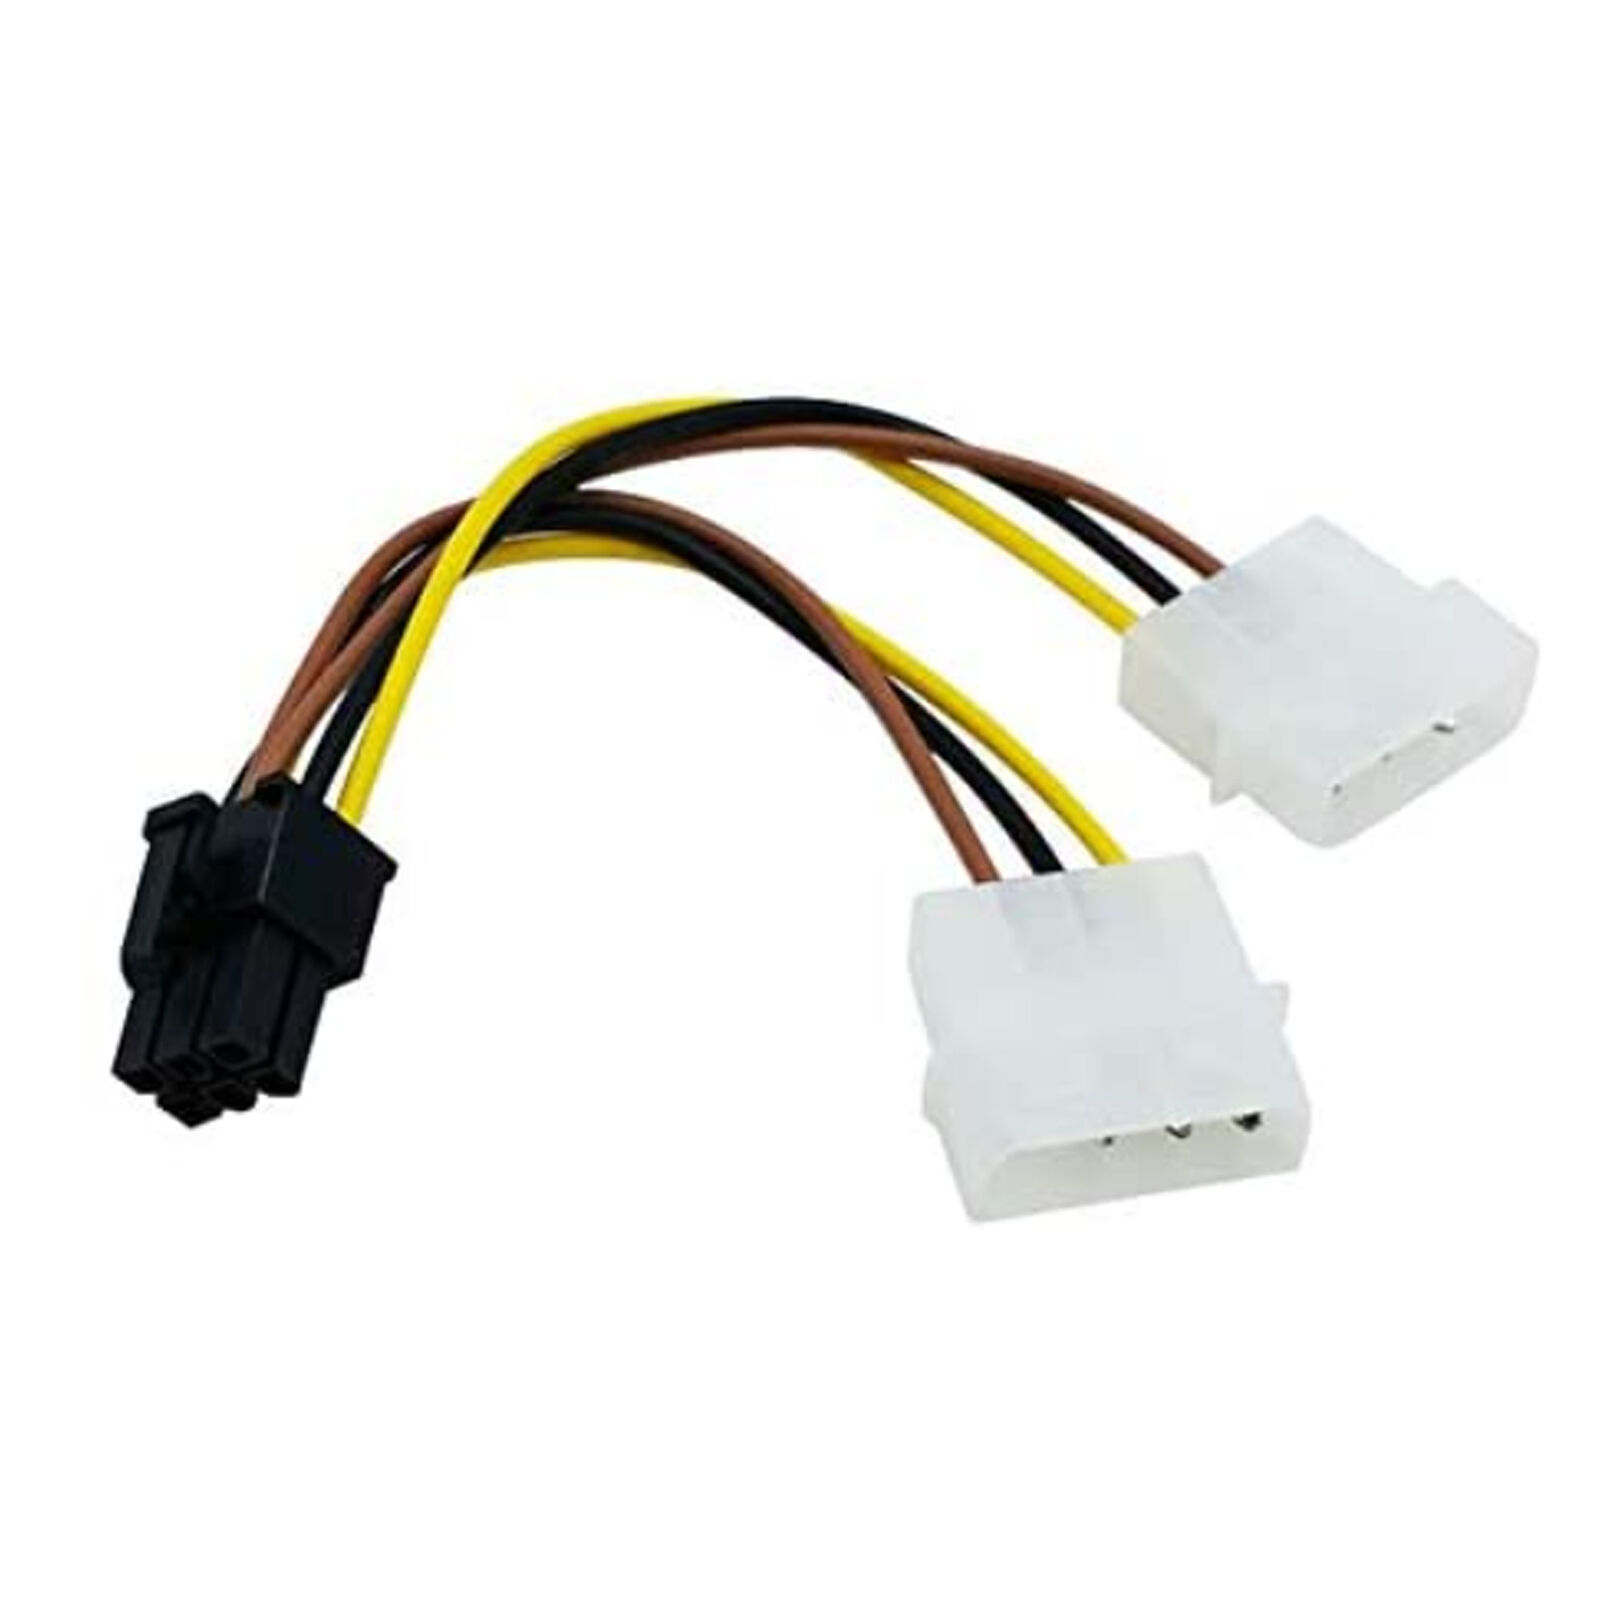 Dual Molex 4-pin to 6-pin PCI Express (PCI-e) Power Adapter Cable Video Card LP4